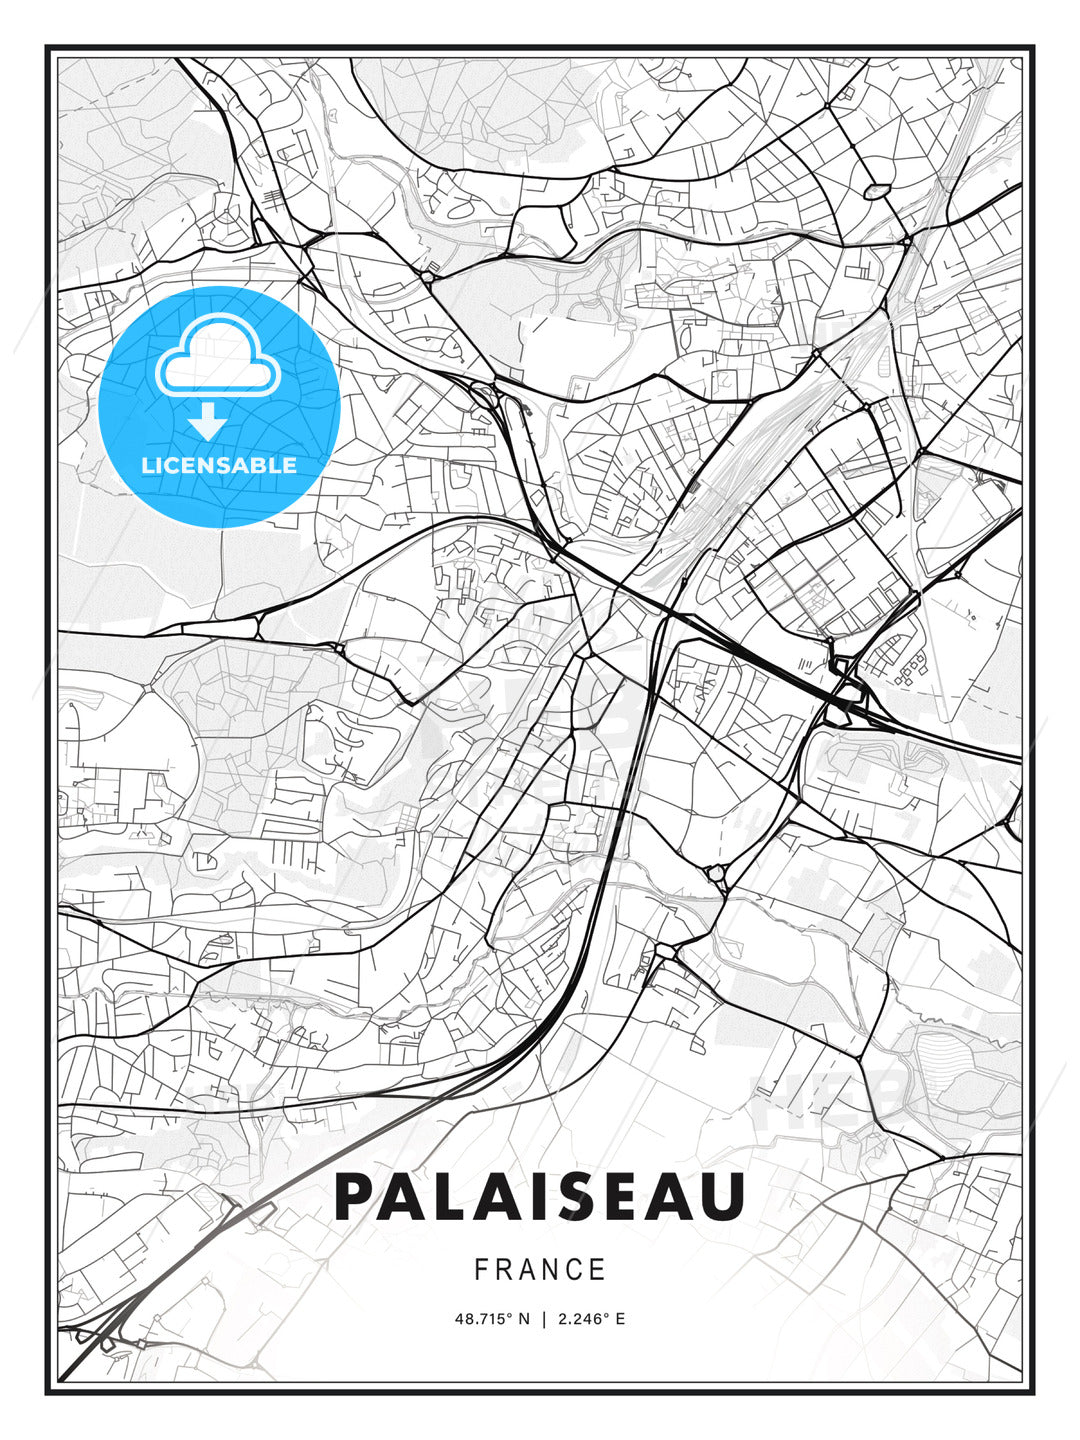 Palaiseau, France, Modern Print Template in Various Formats - HEBSTREITS Sketches